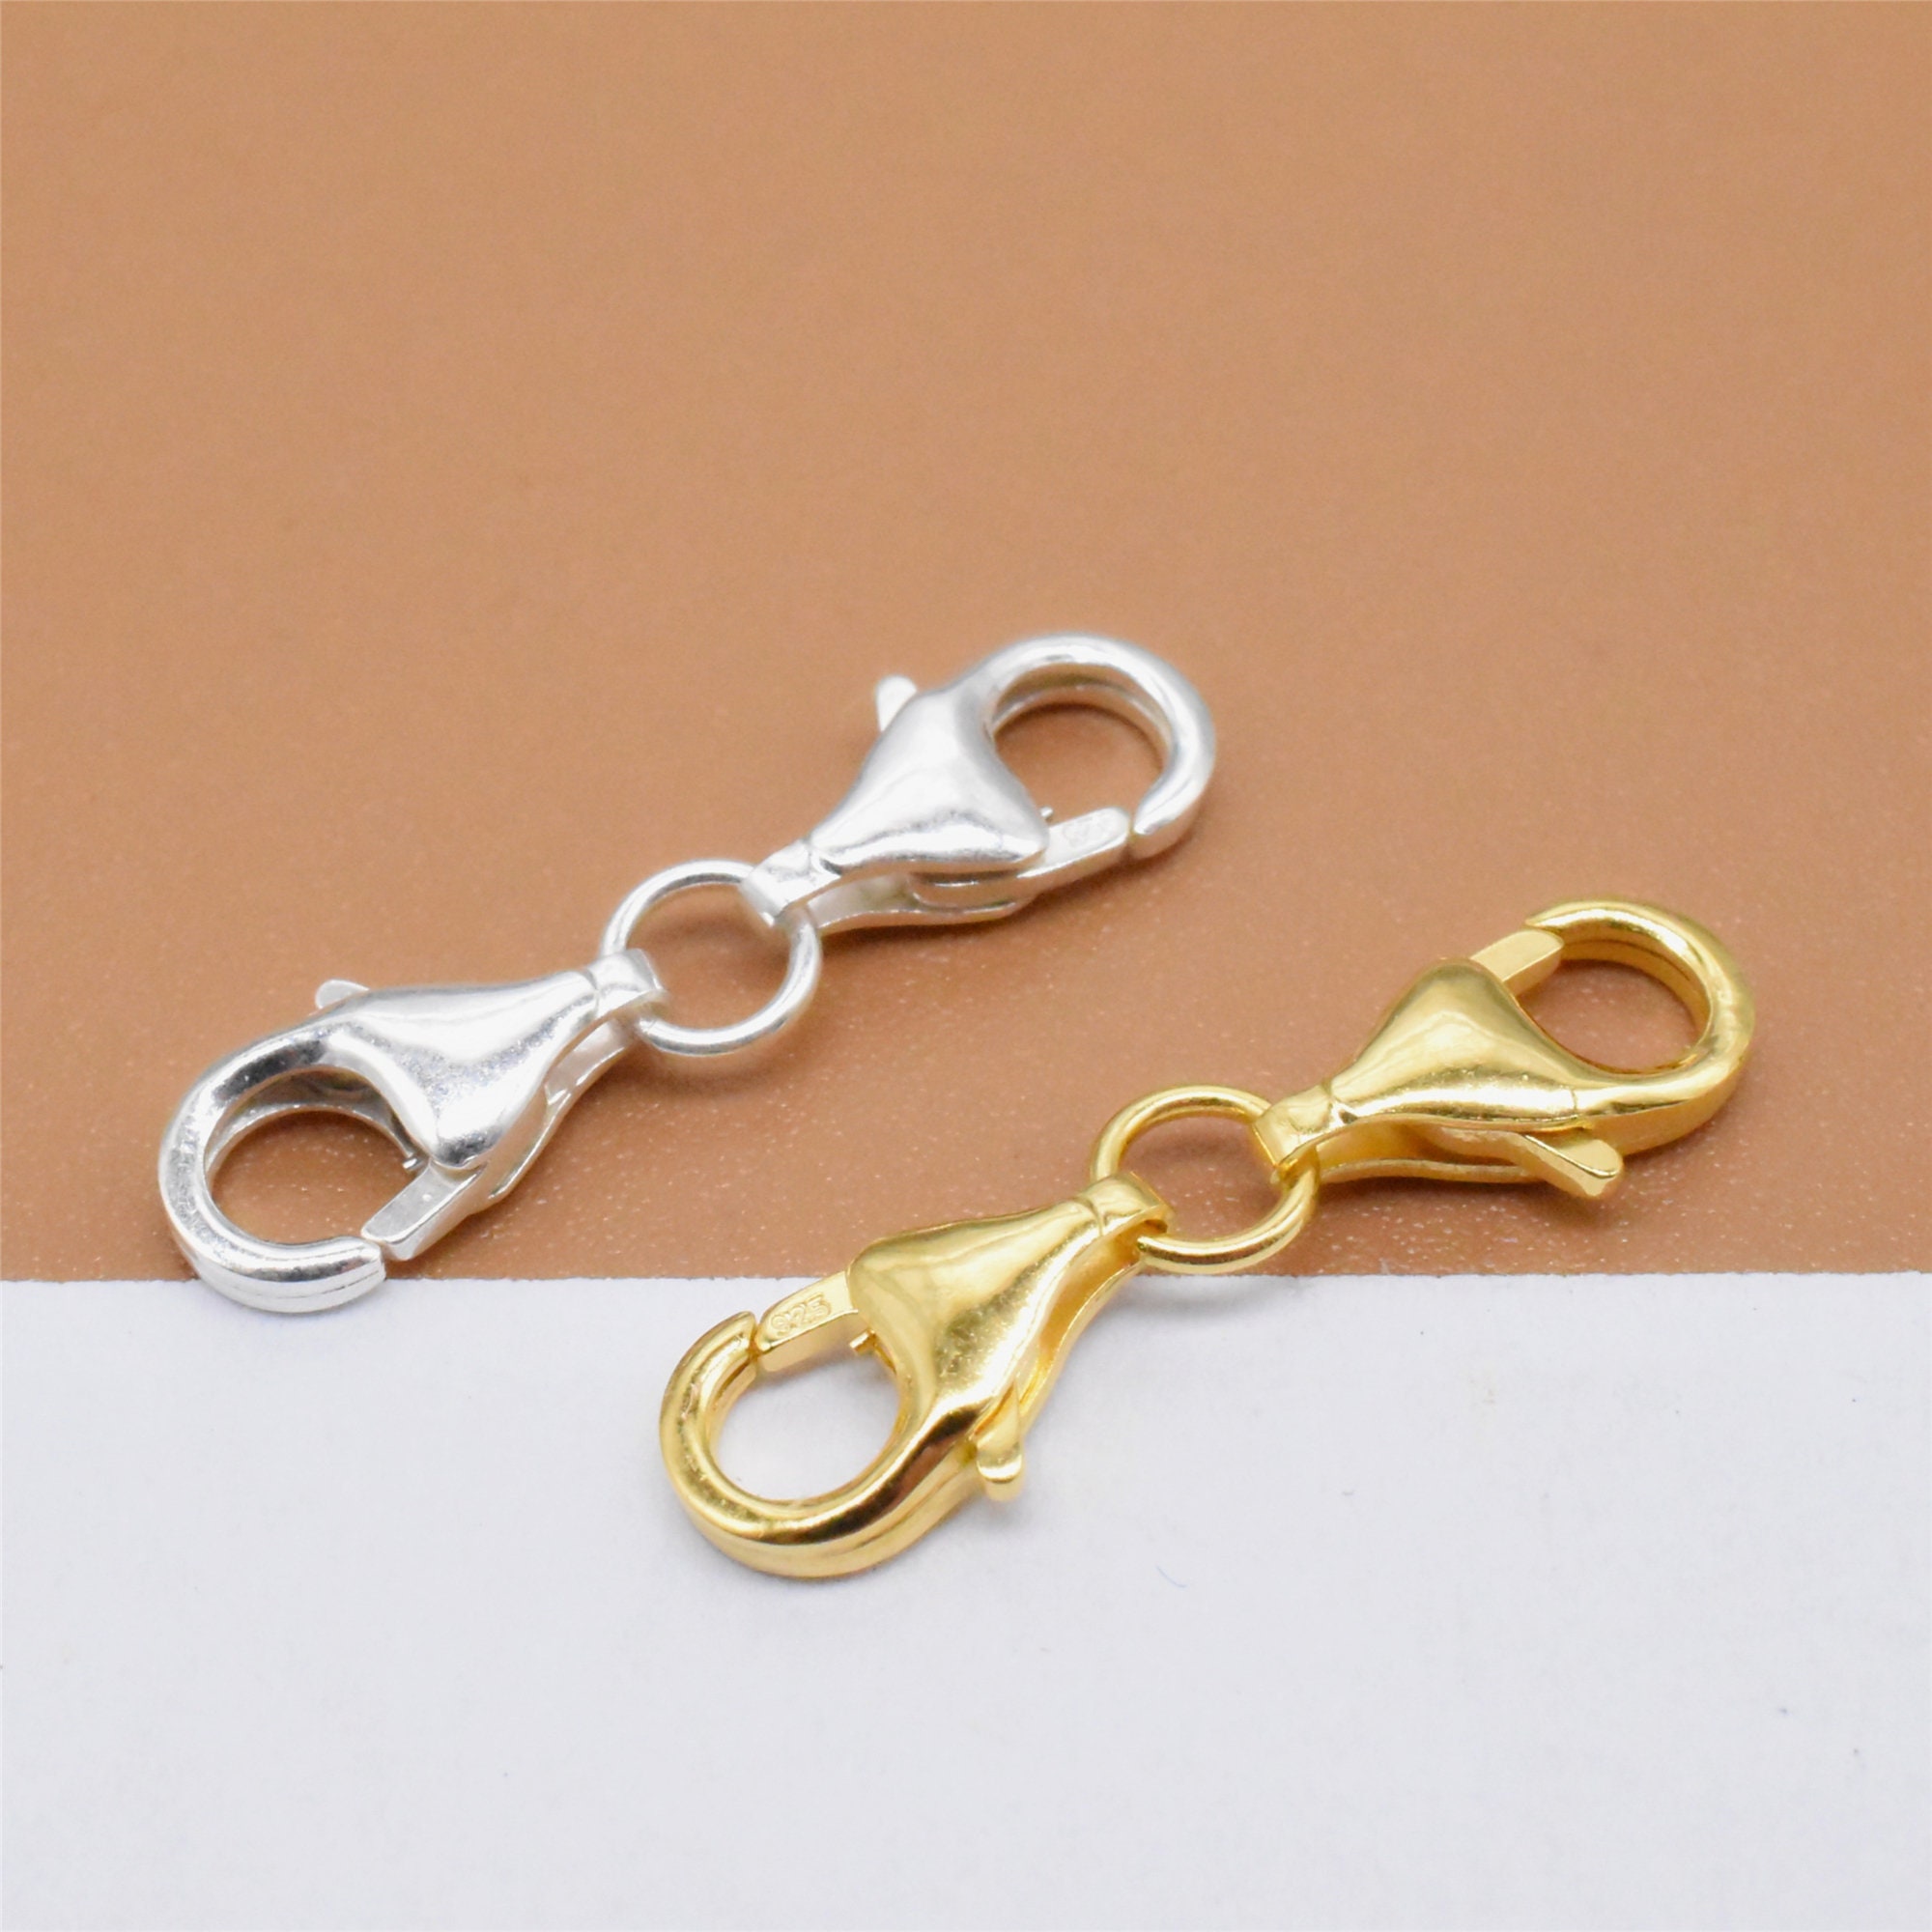 2pcs Double Lobster Clasp Extender, 925 Sterling Silver Necklace Extender  Clasp Jewelry Lobster Clasp Double Claw Connector for Necklace Bracelet DIY